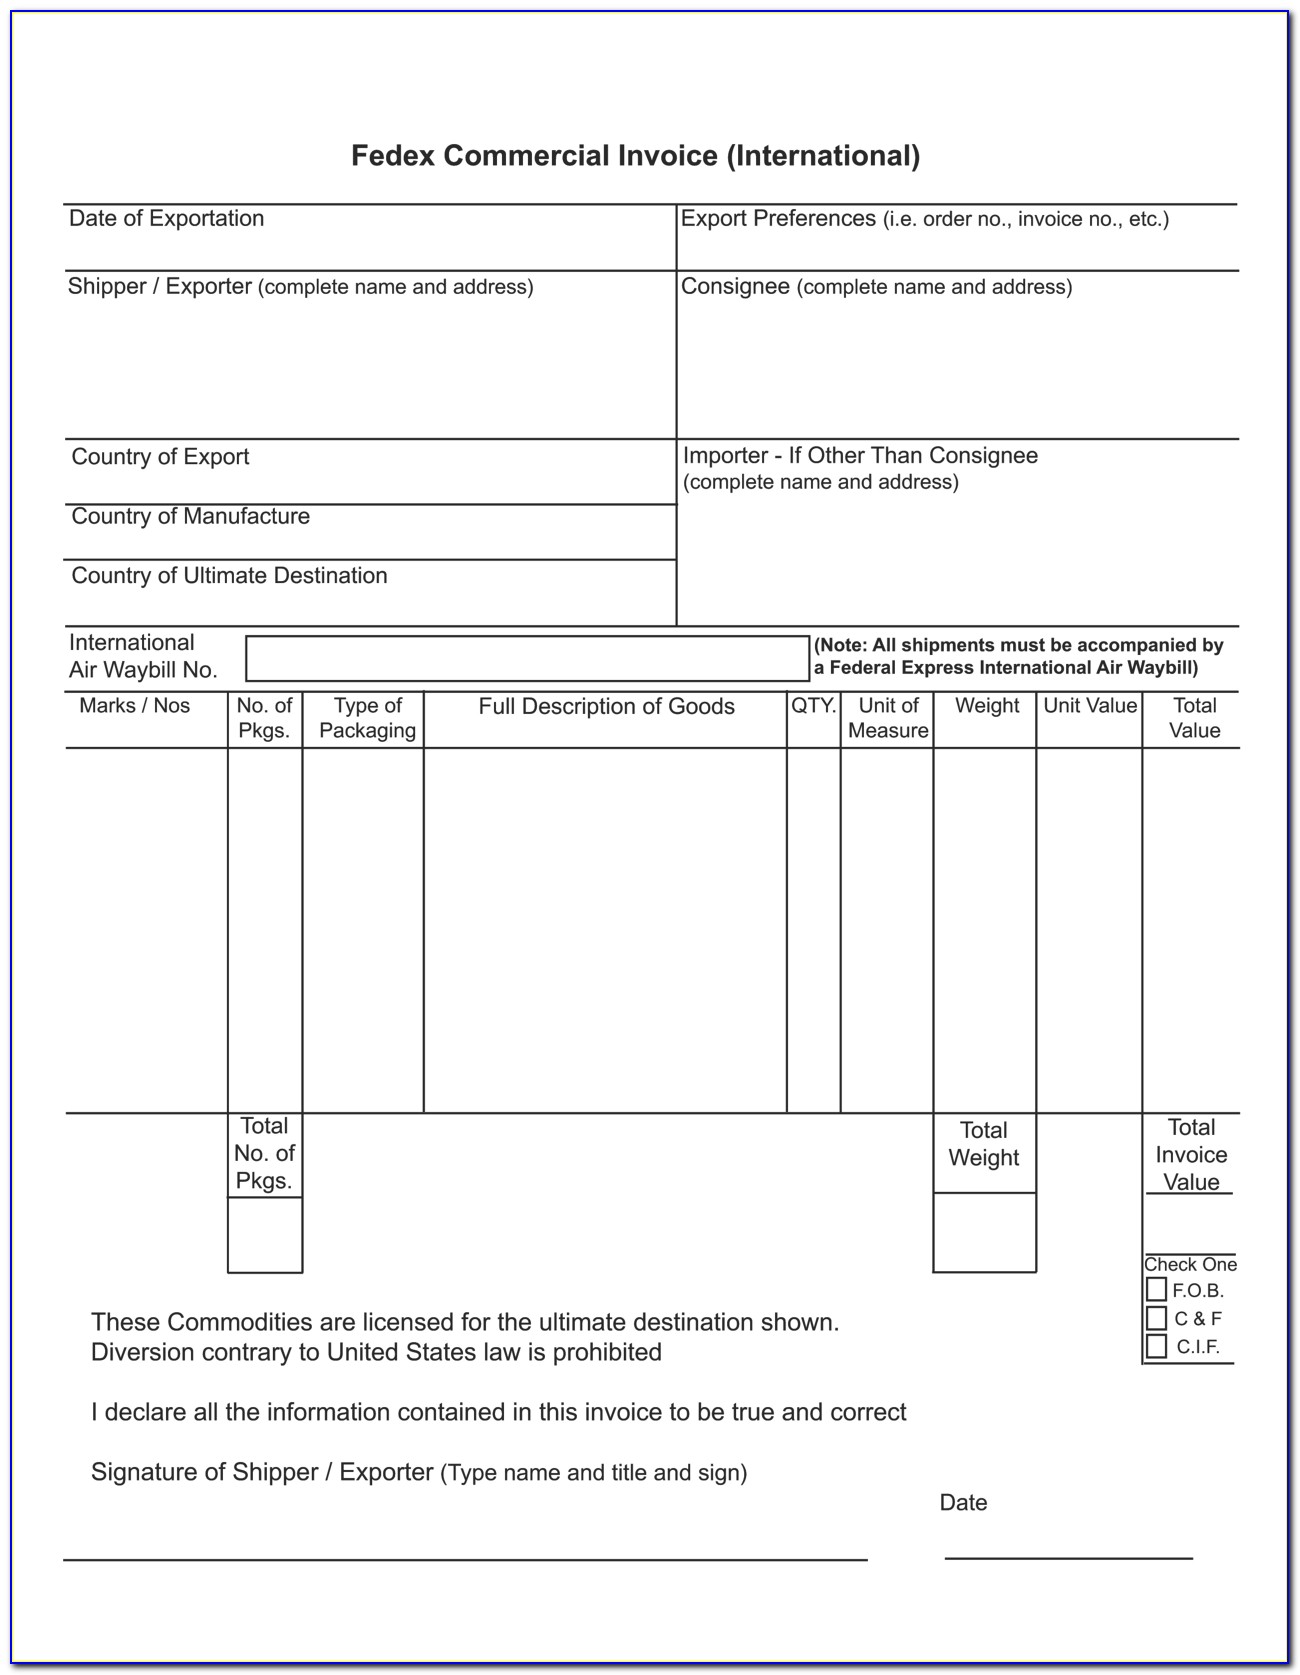 Fedex Bill Of Lading Template